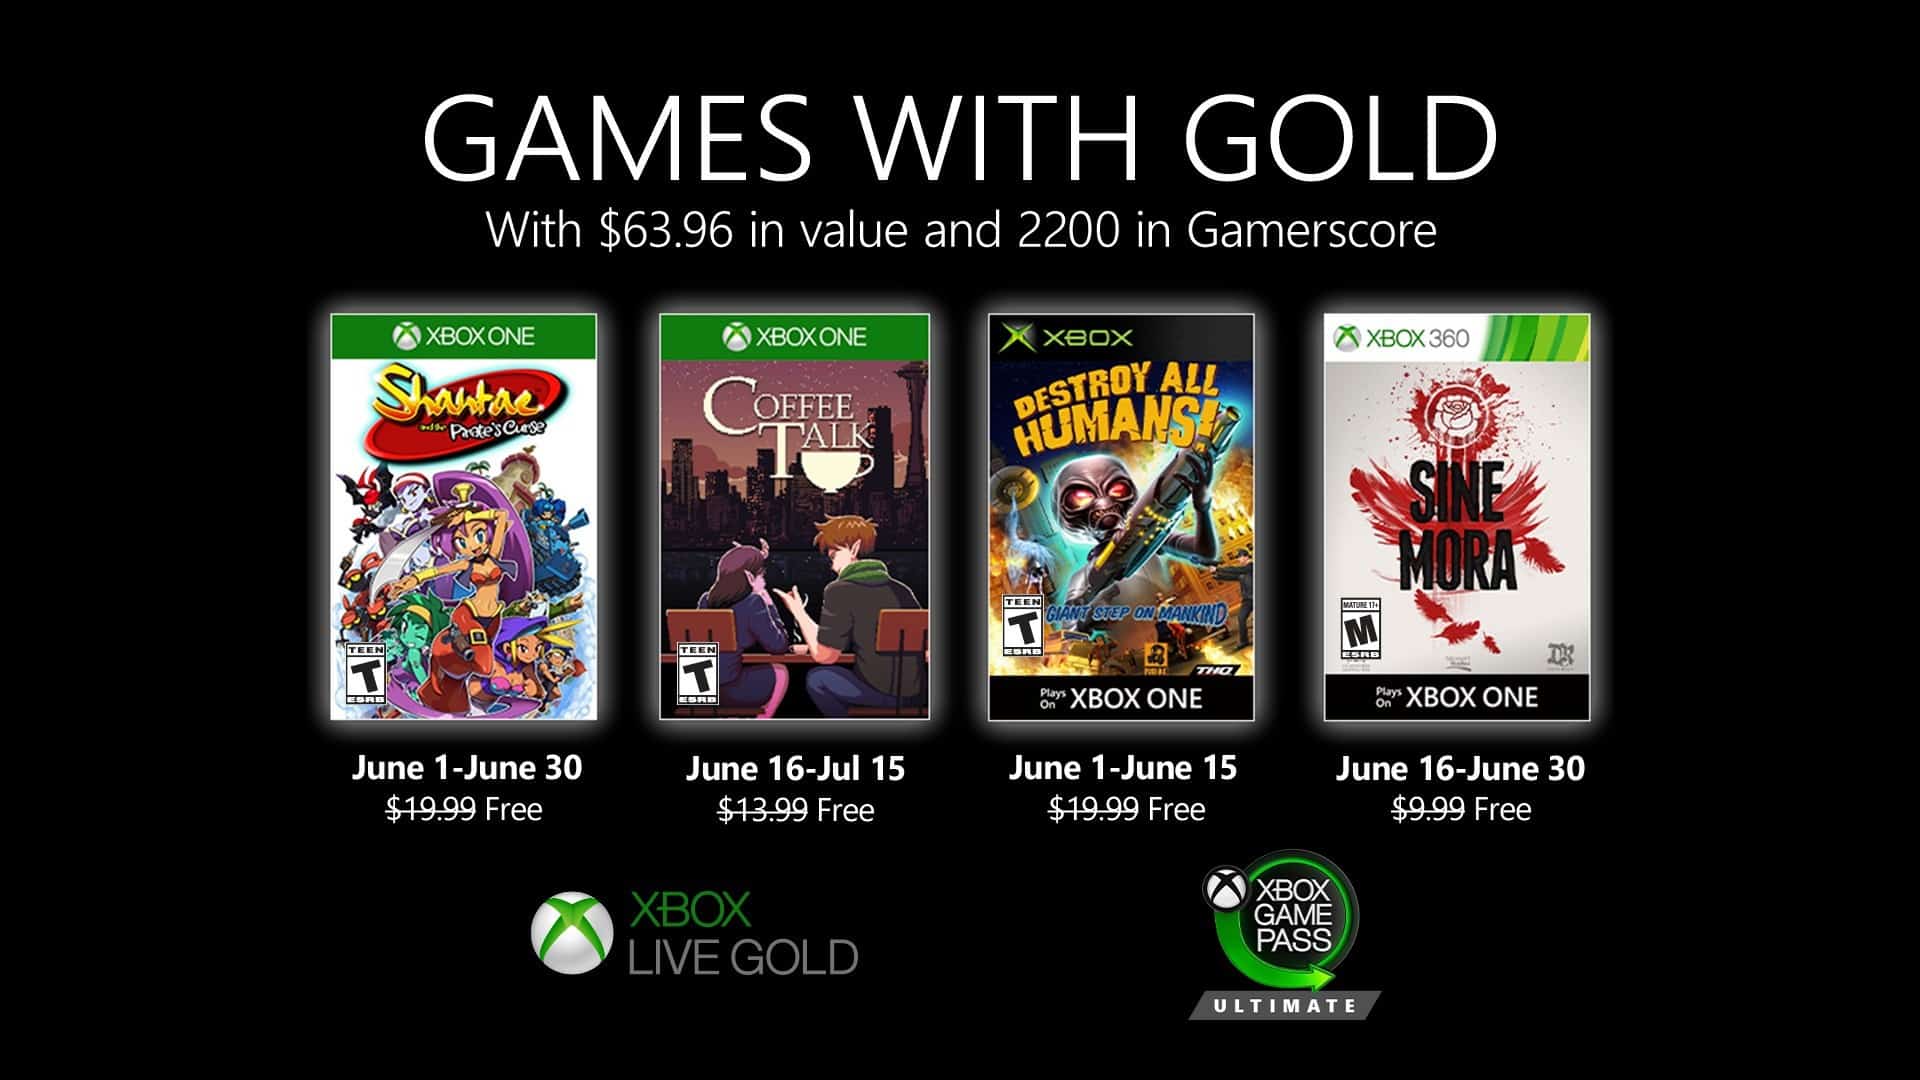 Xbox Games With Gold June 2020 Lineup Includes an Original 2005 Xbox Game